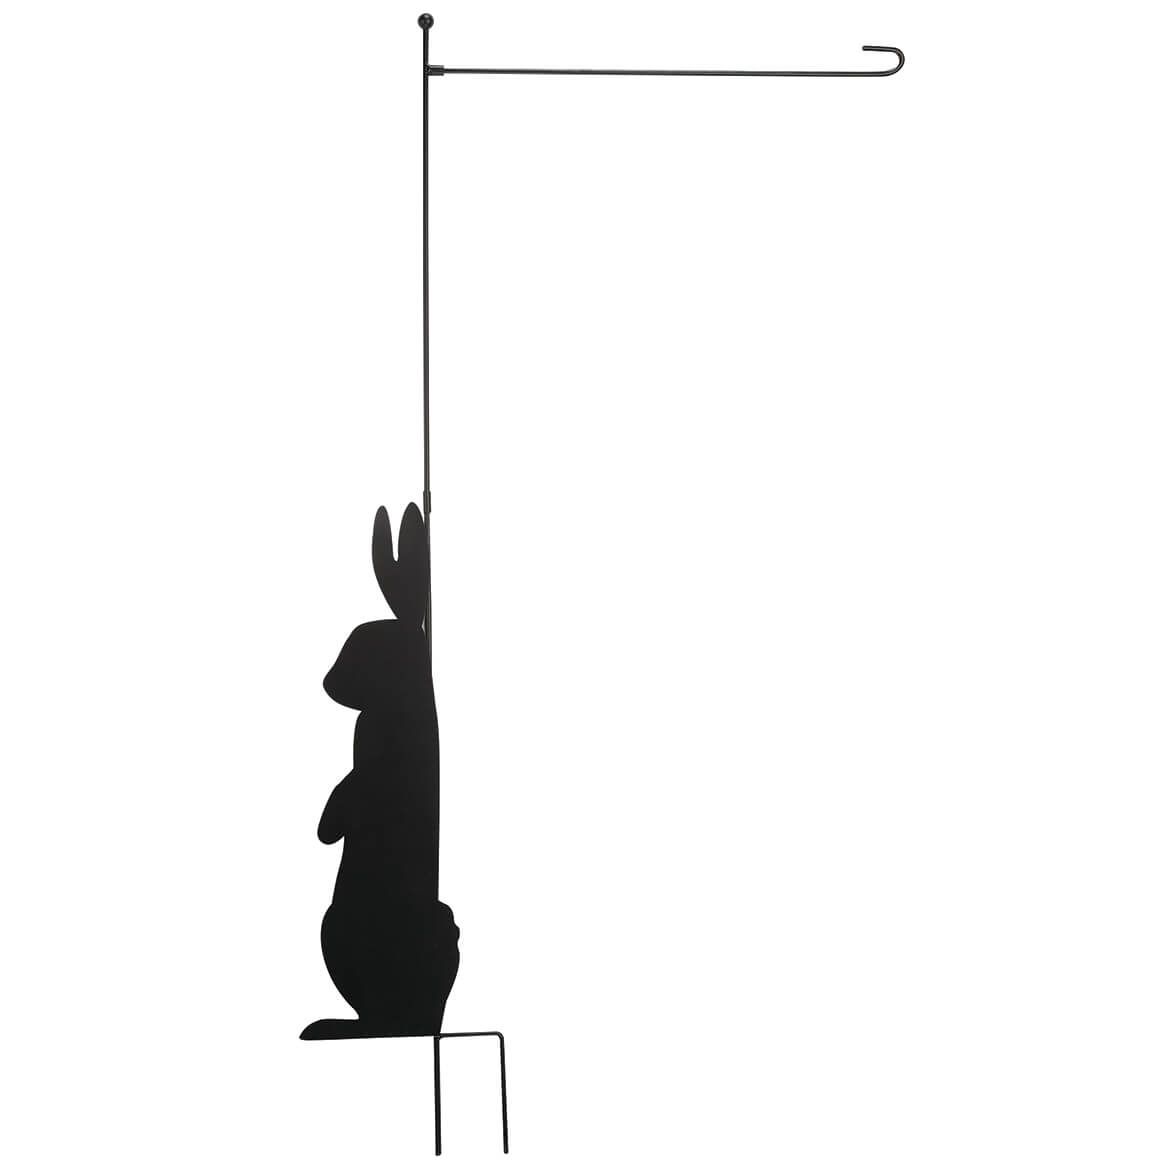 Bunny Silhouette Metal Garden Flag Holder by Fox River™ Creations + '-' + 374105